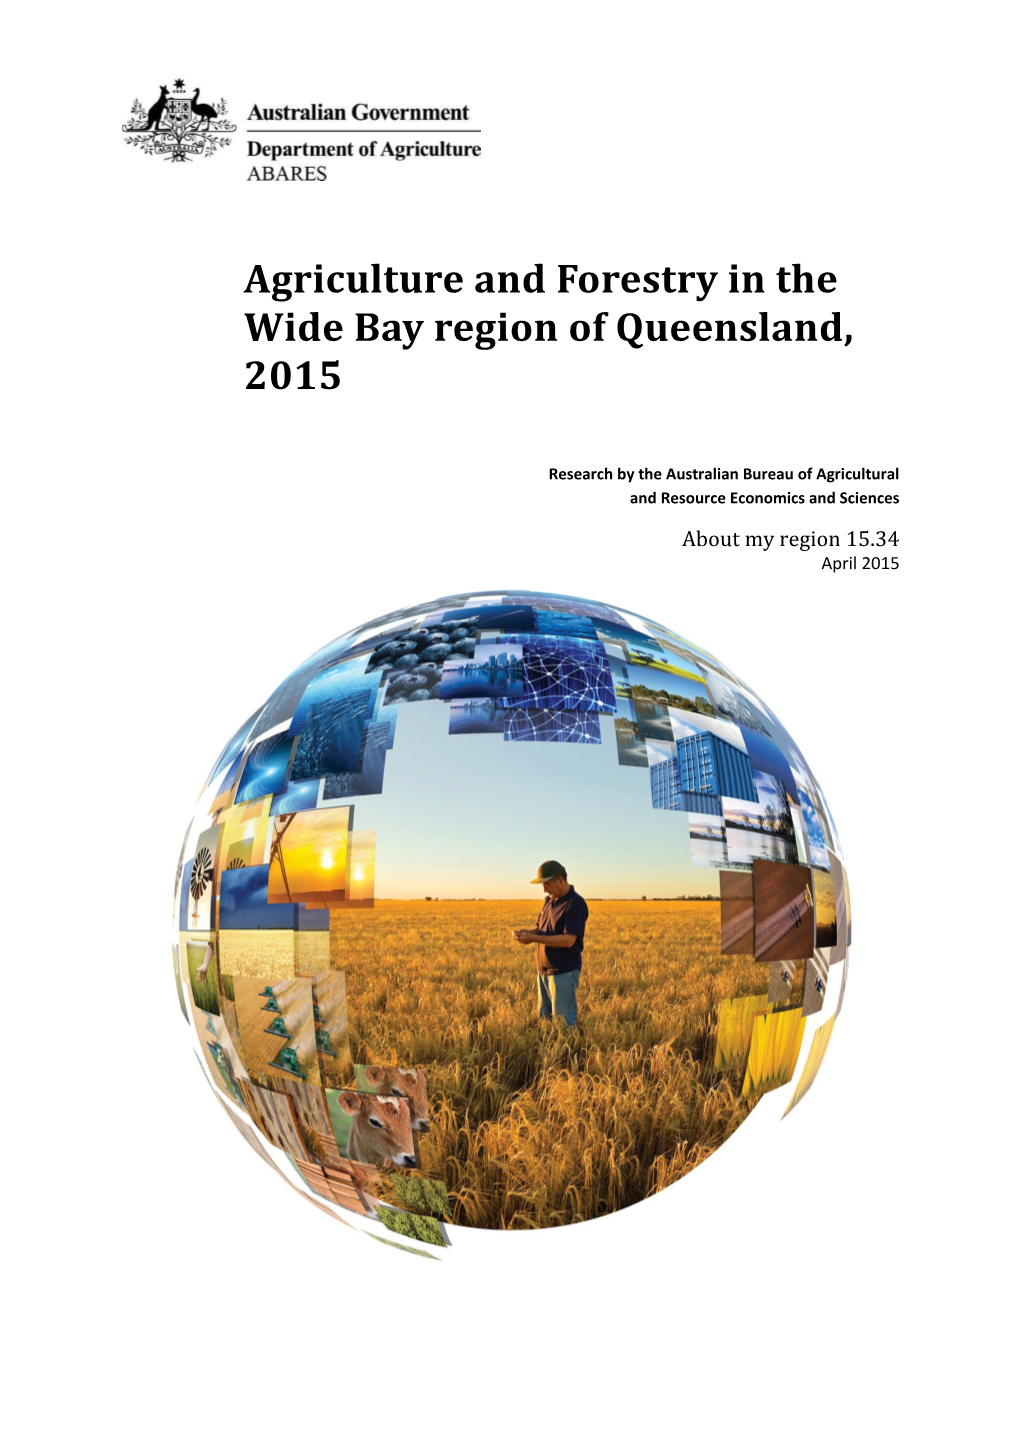 Agriculture and Forestry in the Wide Bay Region of Queensland, 2015